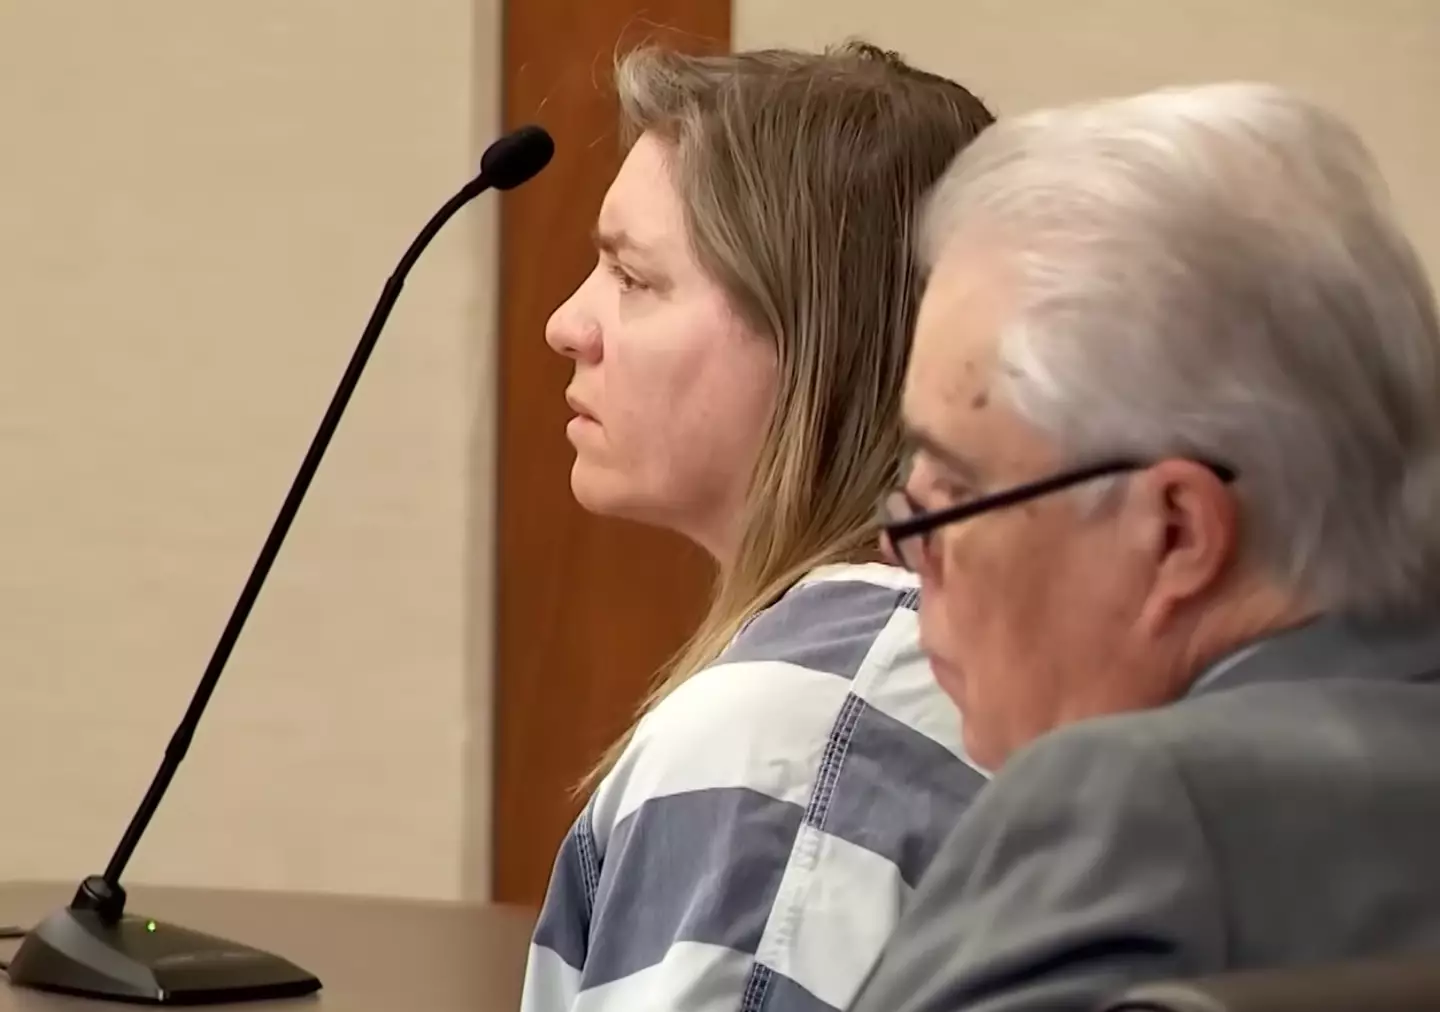 The body language expert believed that the judge did not have the same view of Hildebrandt.